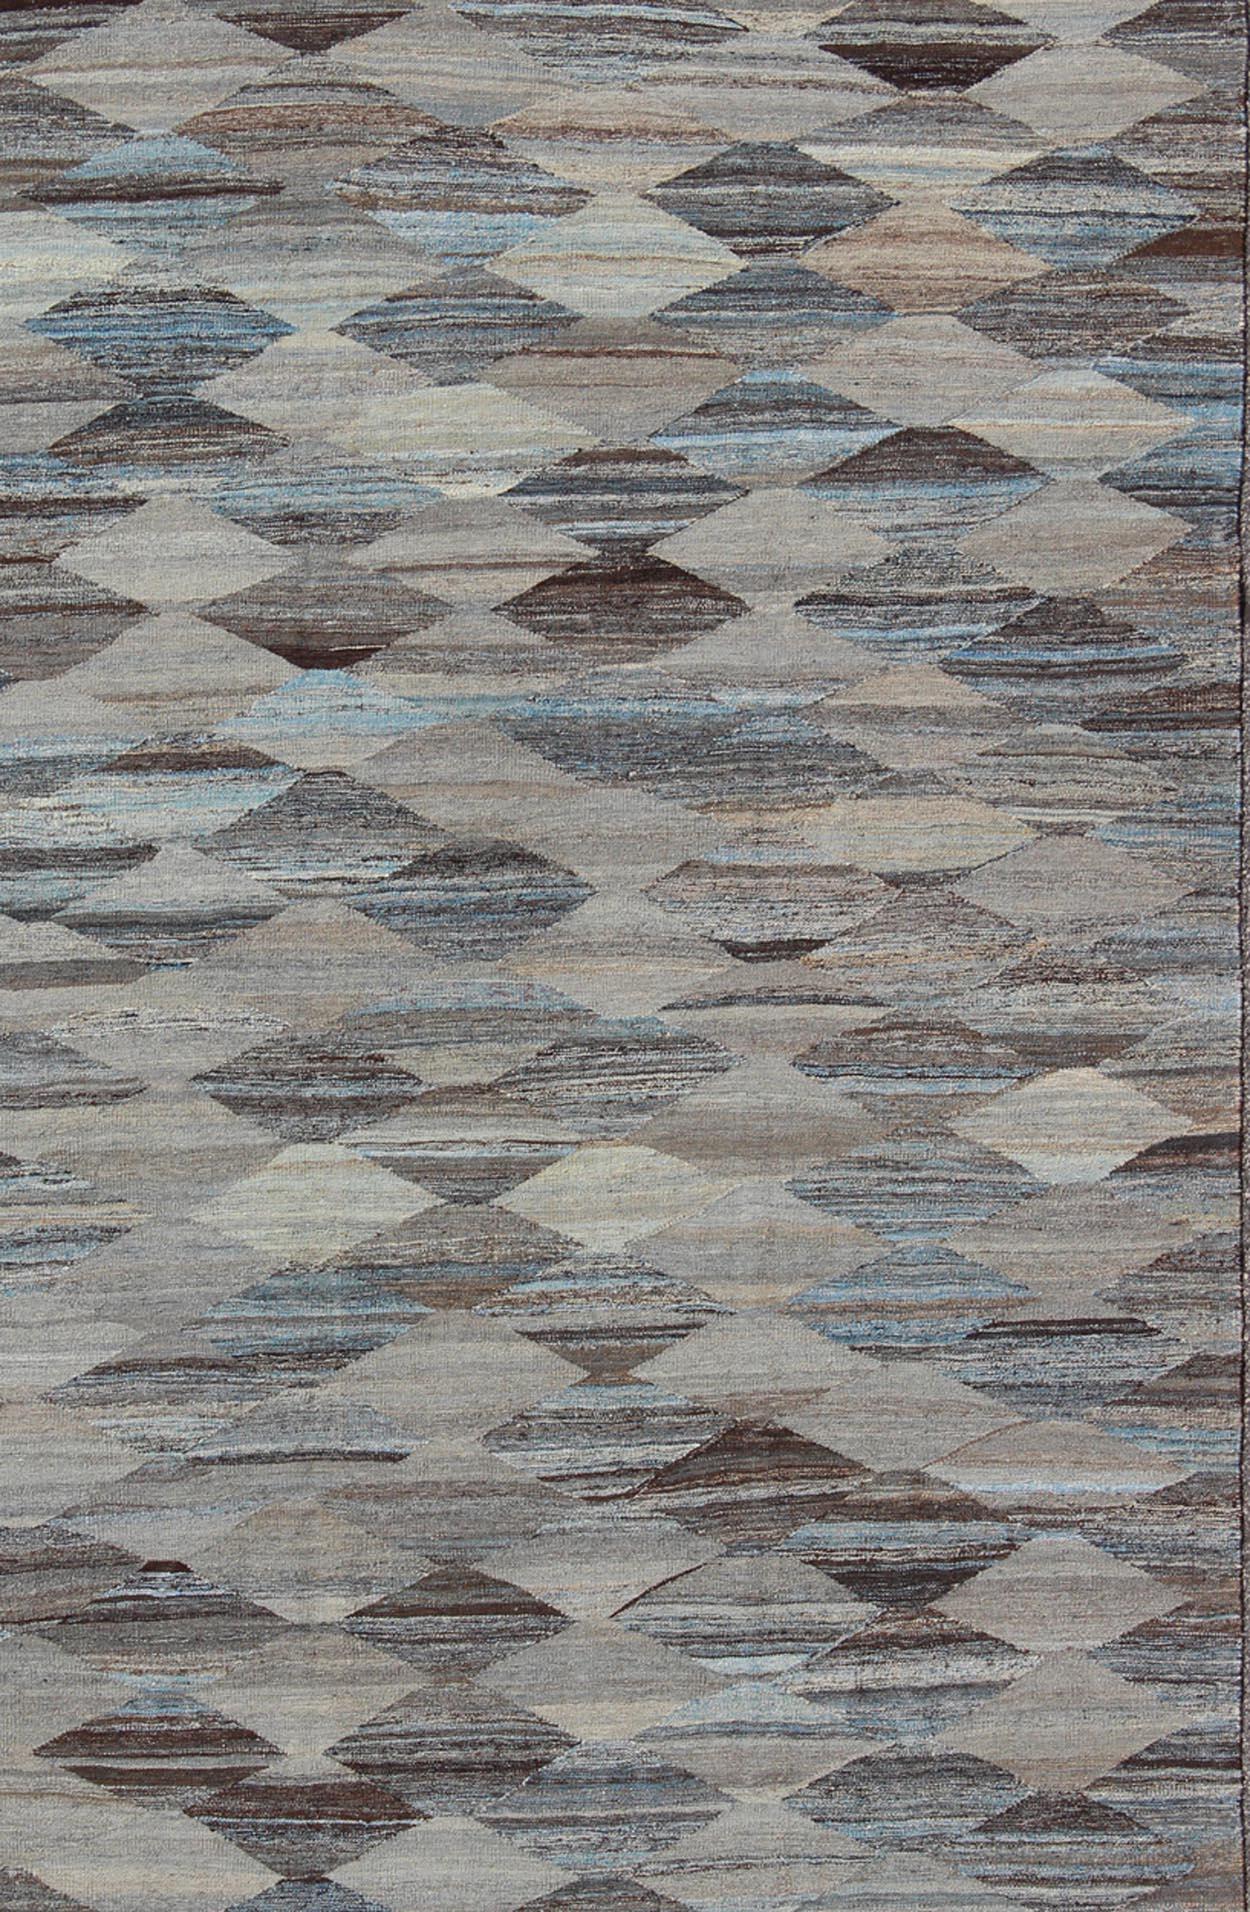 Modern and casual flat-woven Kilim rug. Neutrals, charcoal, gray, blue and brown diamond Afghan Modern Kilim Geometric design. Keivan Woven Arts / Rug AFG-13481, country of origin / type: Afghanistan / Kilim

The unique design of this groovy